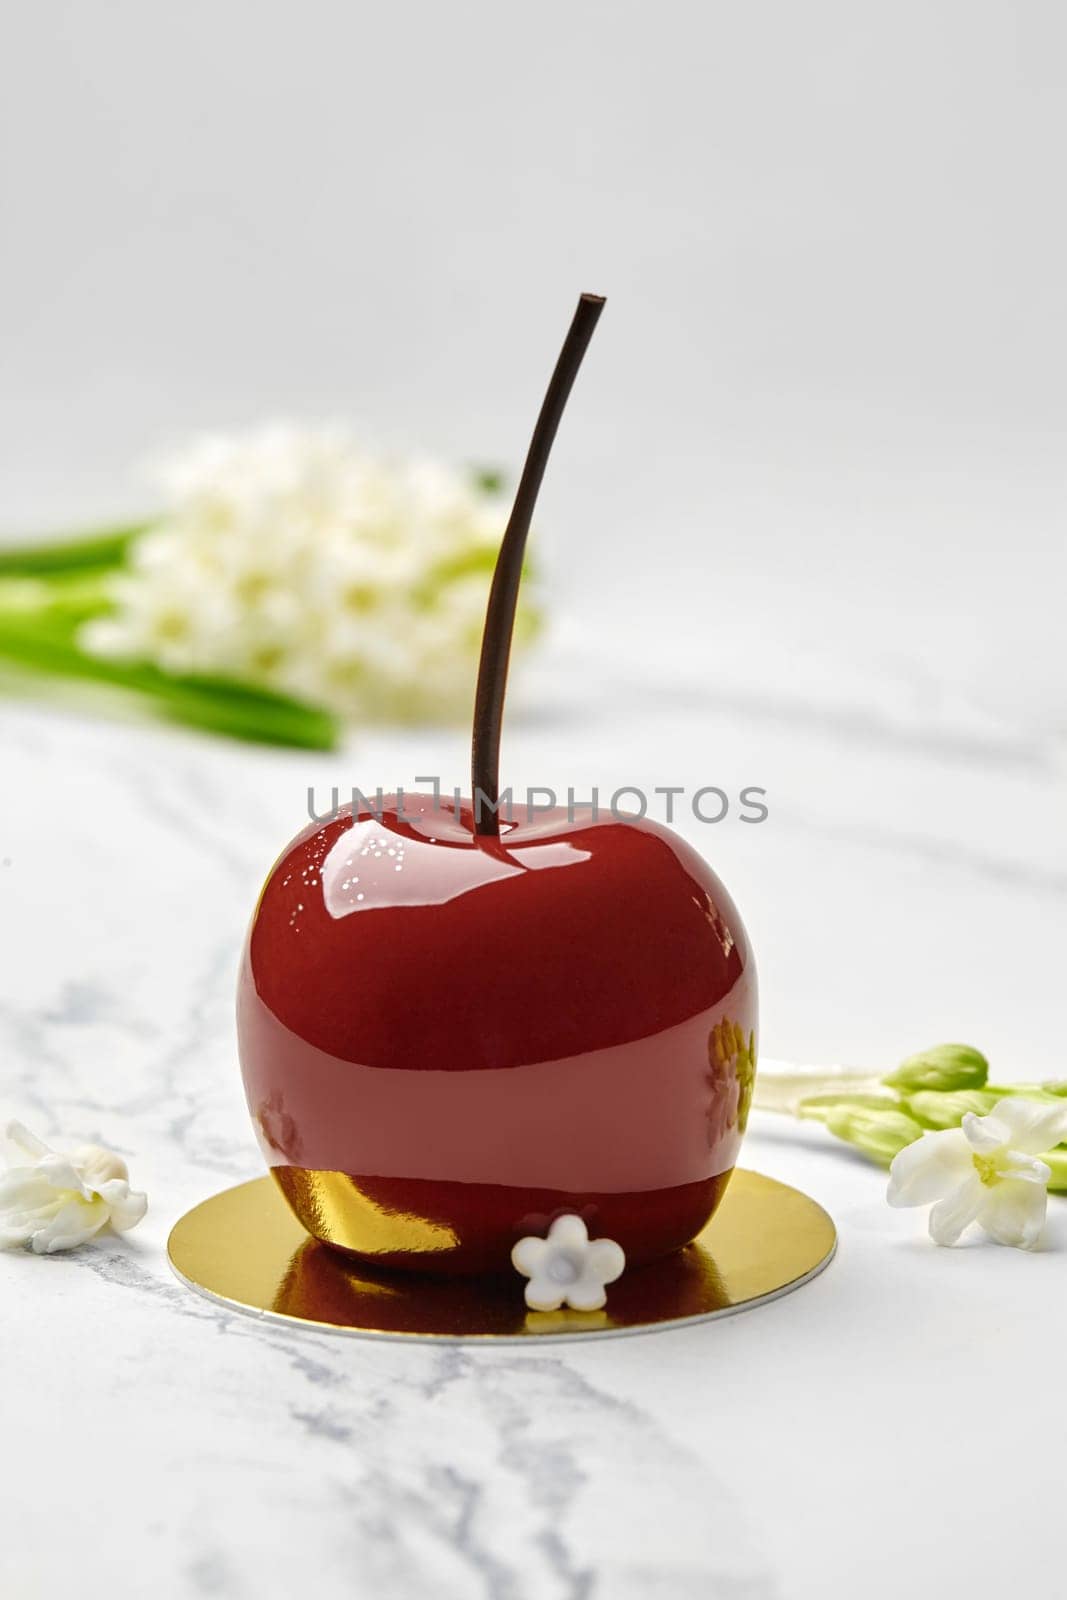 Artisan cherry-shaped dessert, inspired by nature simplicity, with vibrant red glaze and chocolate stem served on gold cardboard pastry base, on marble top with sprig of white flowers